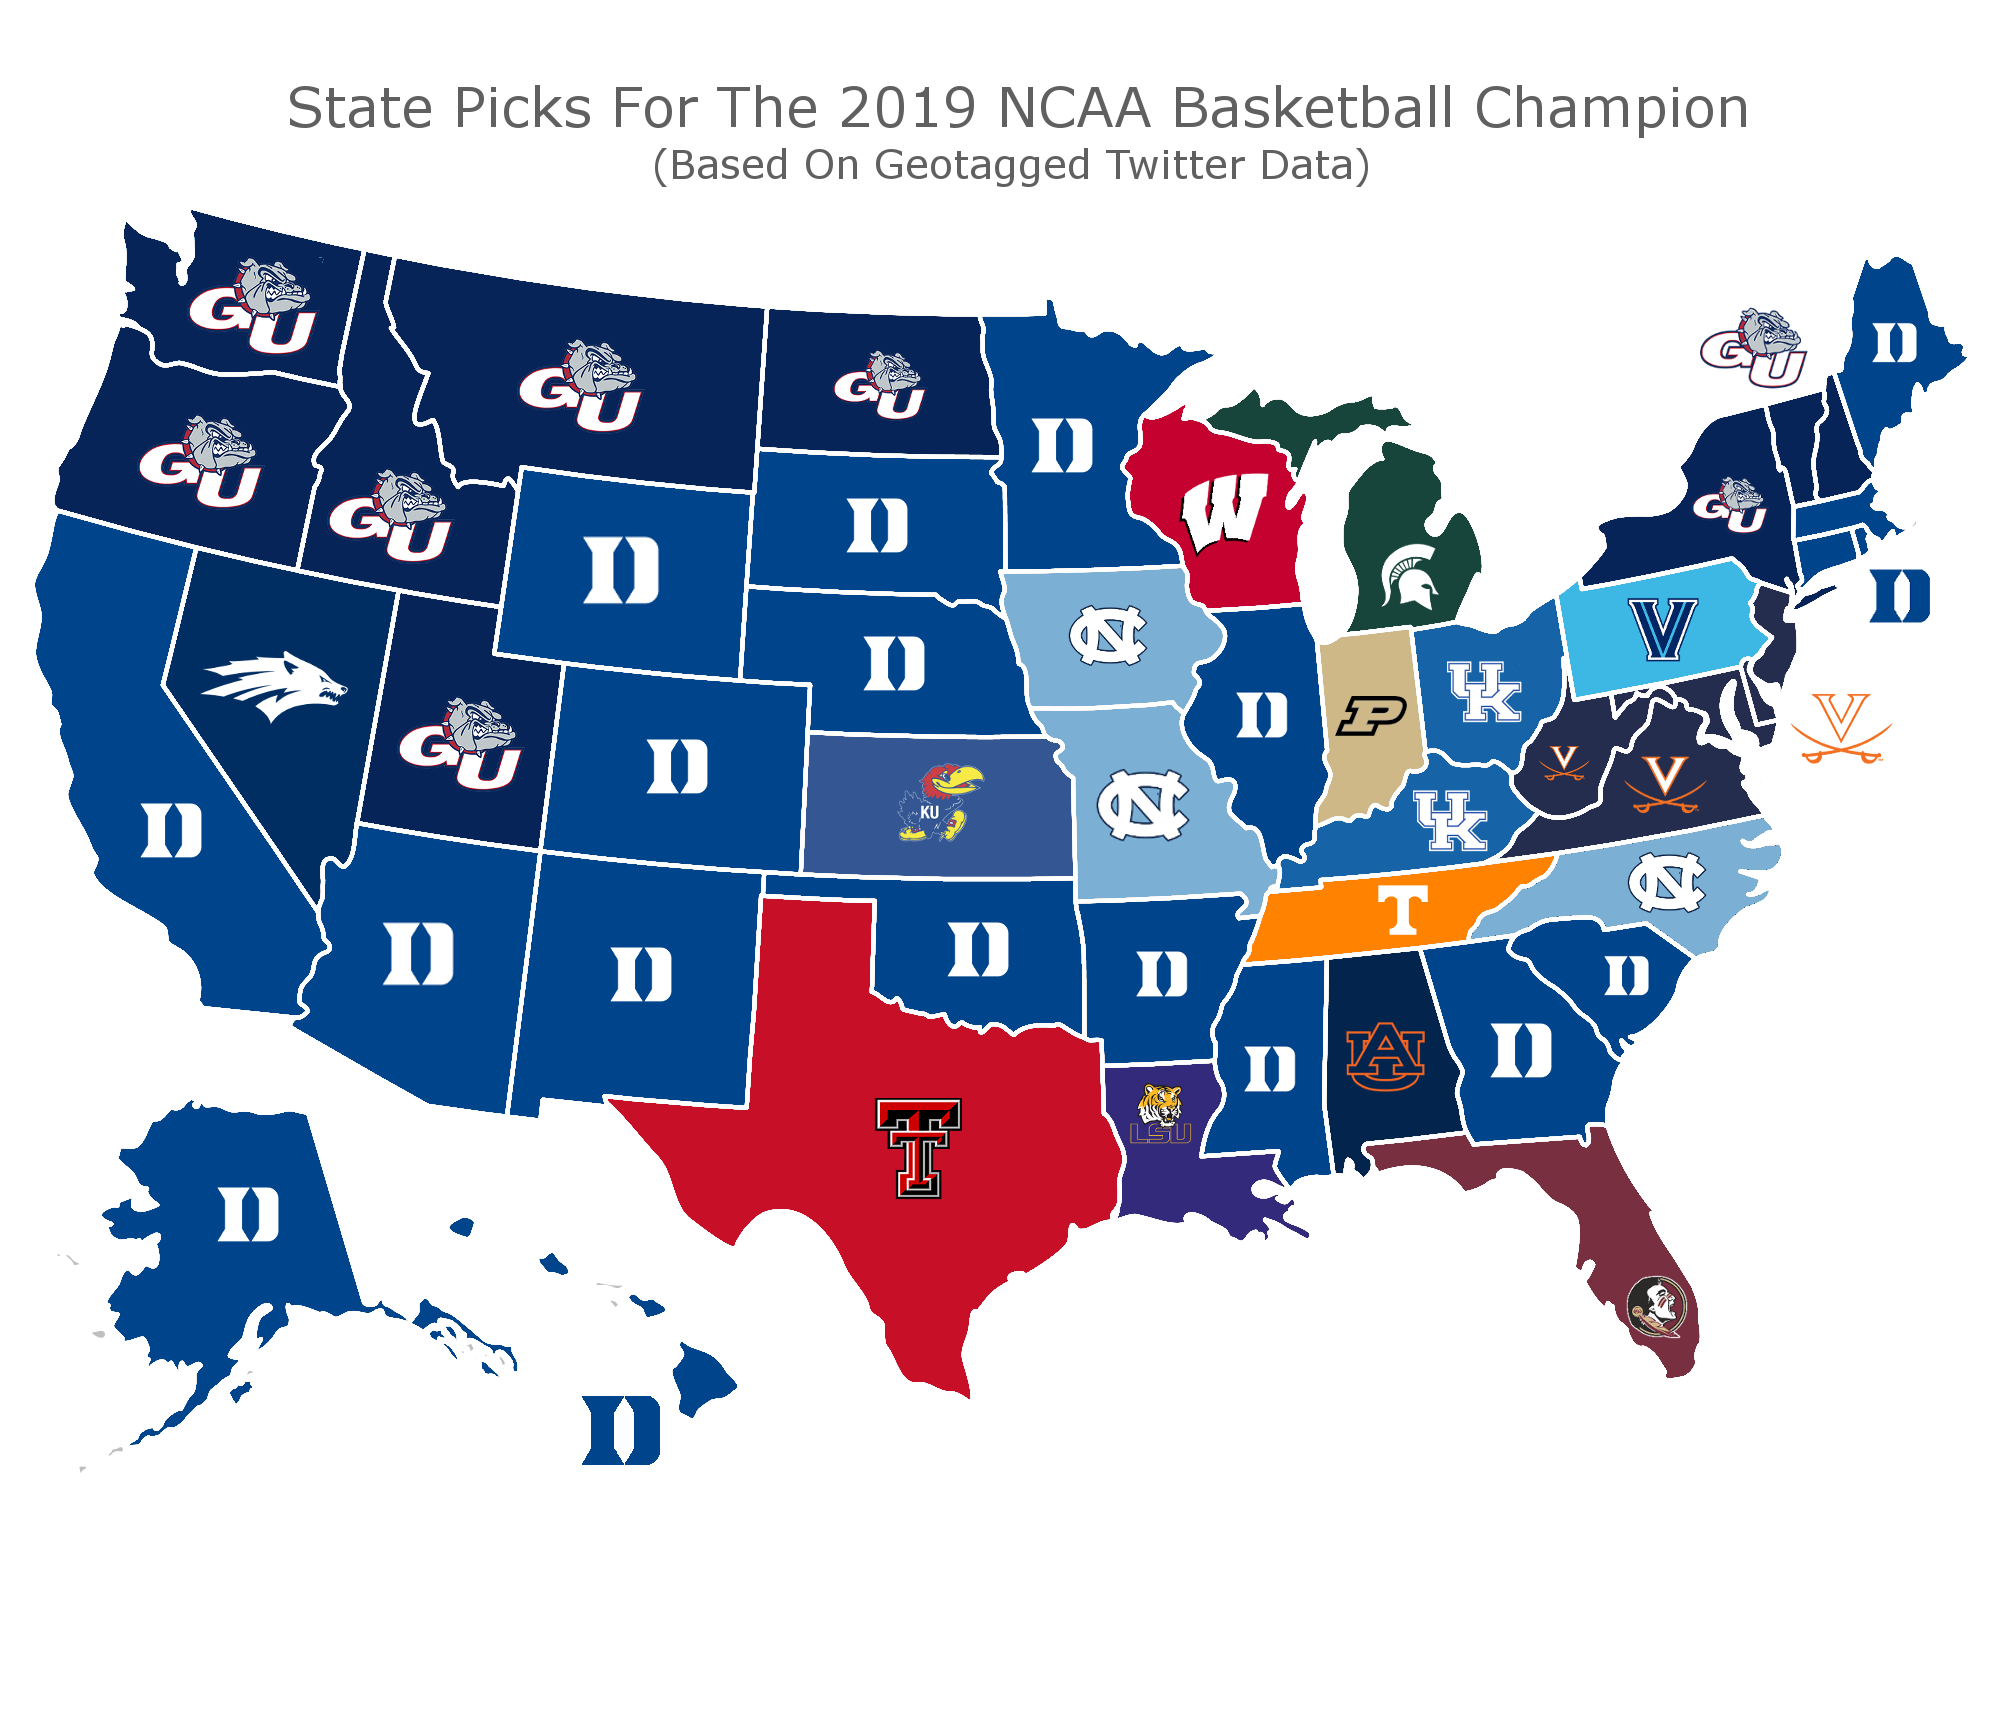 see-map-of-the-different-march-madness-championship-predictions-by-state-duke-leads-with-20